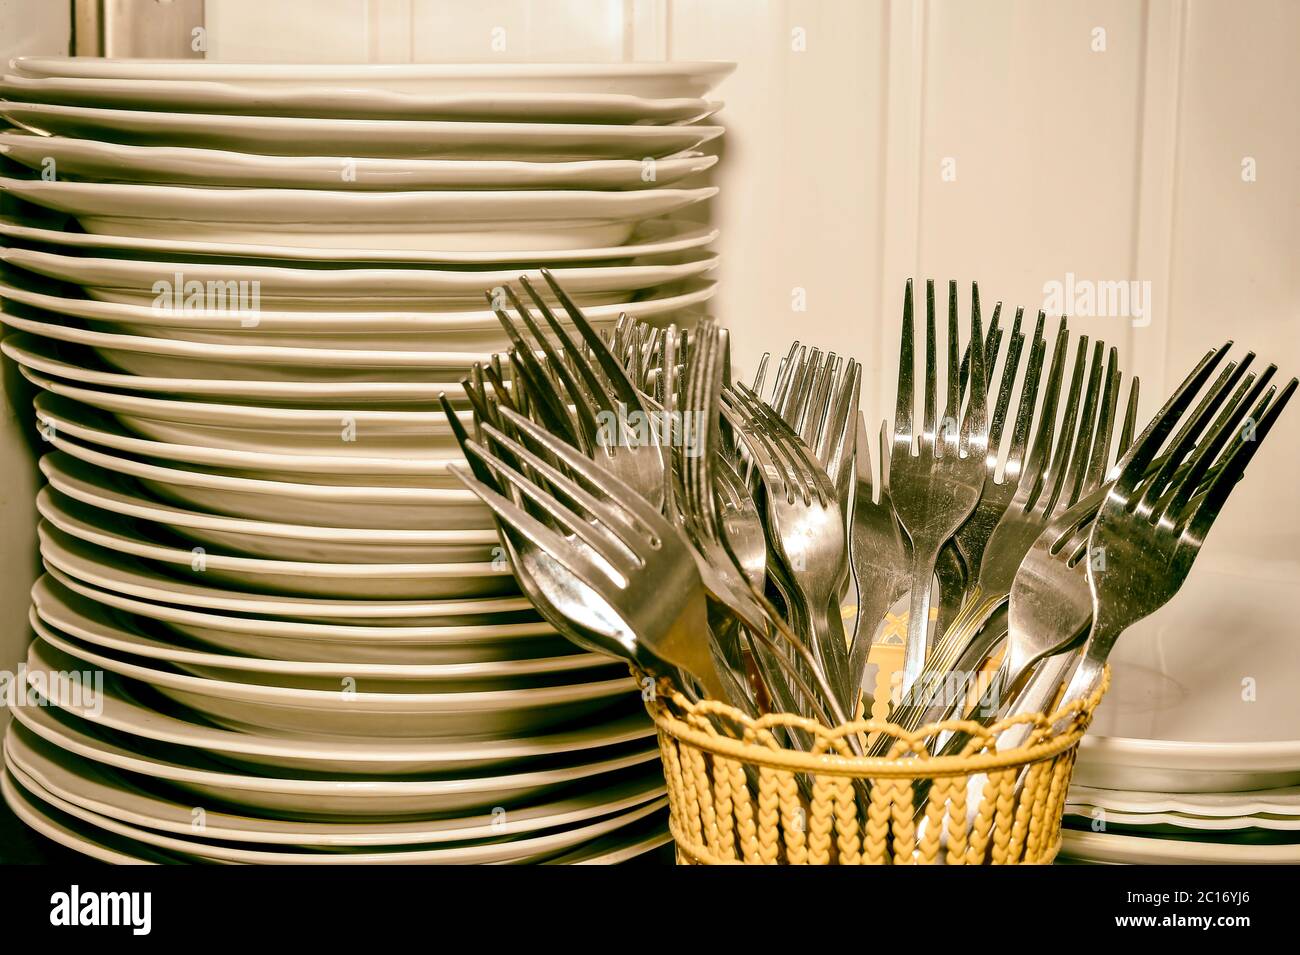 A stack of washed dishes and forks in the kitchen Stock Photo